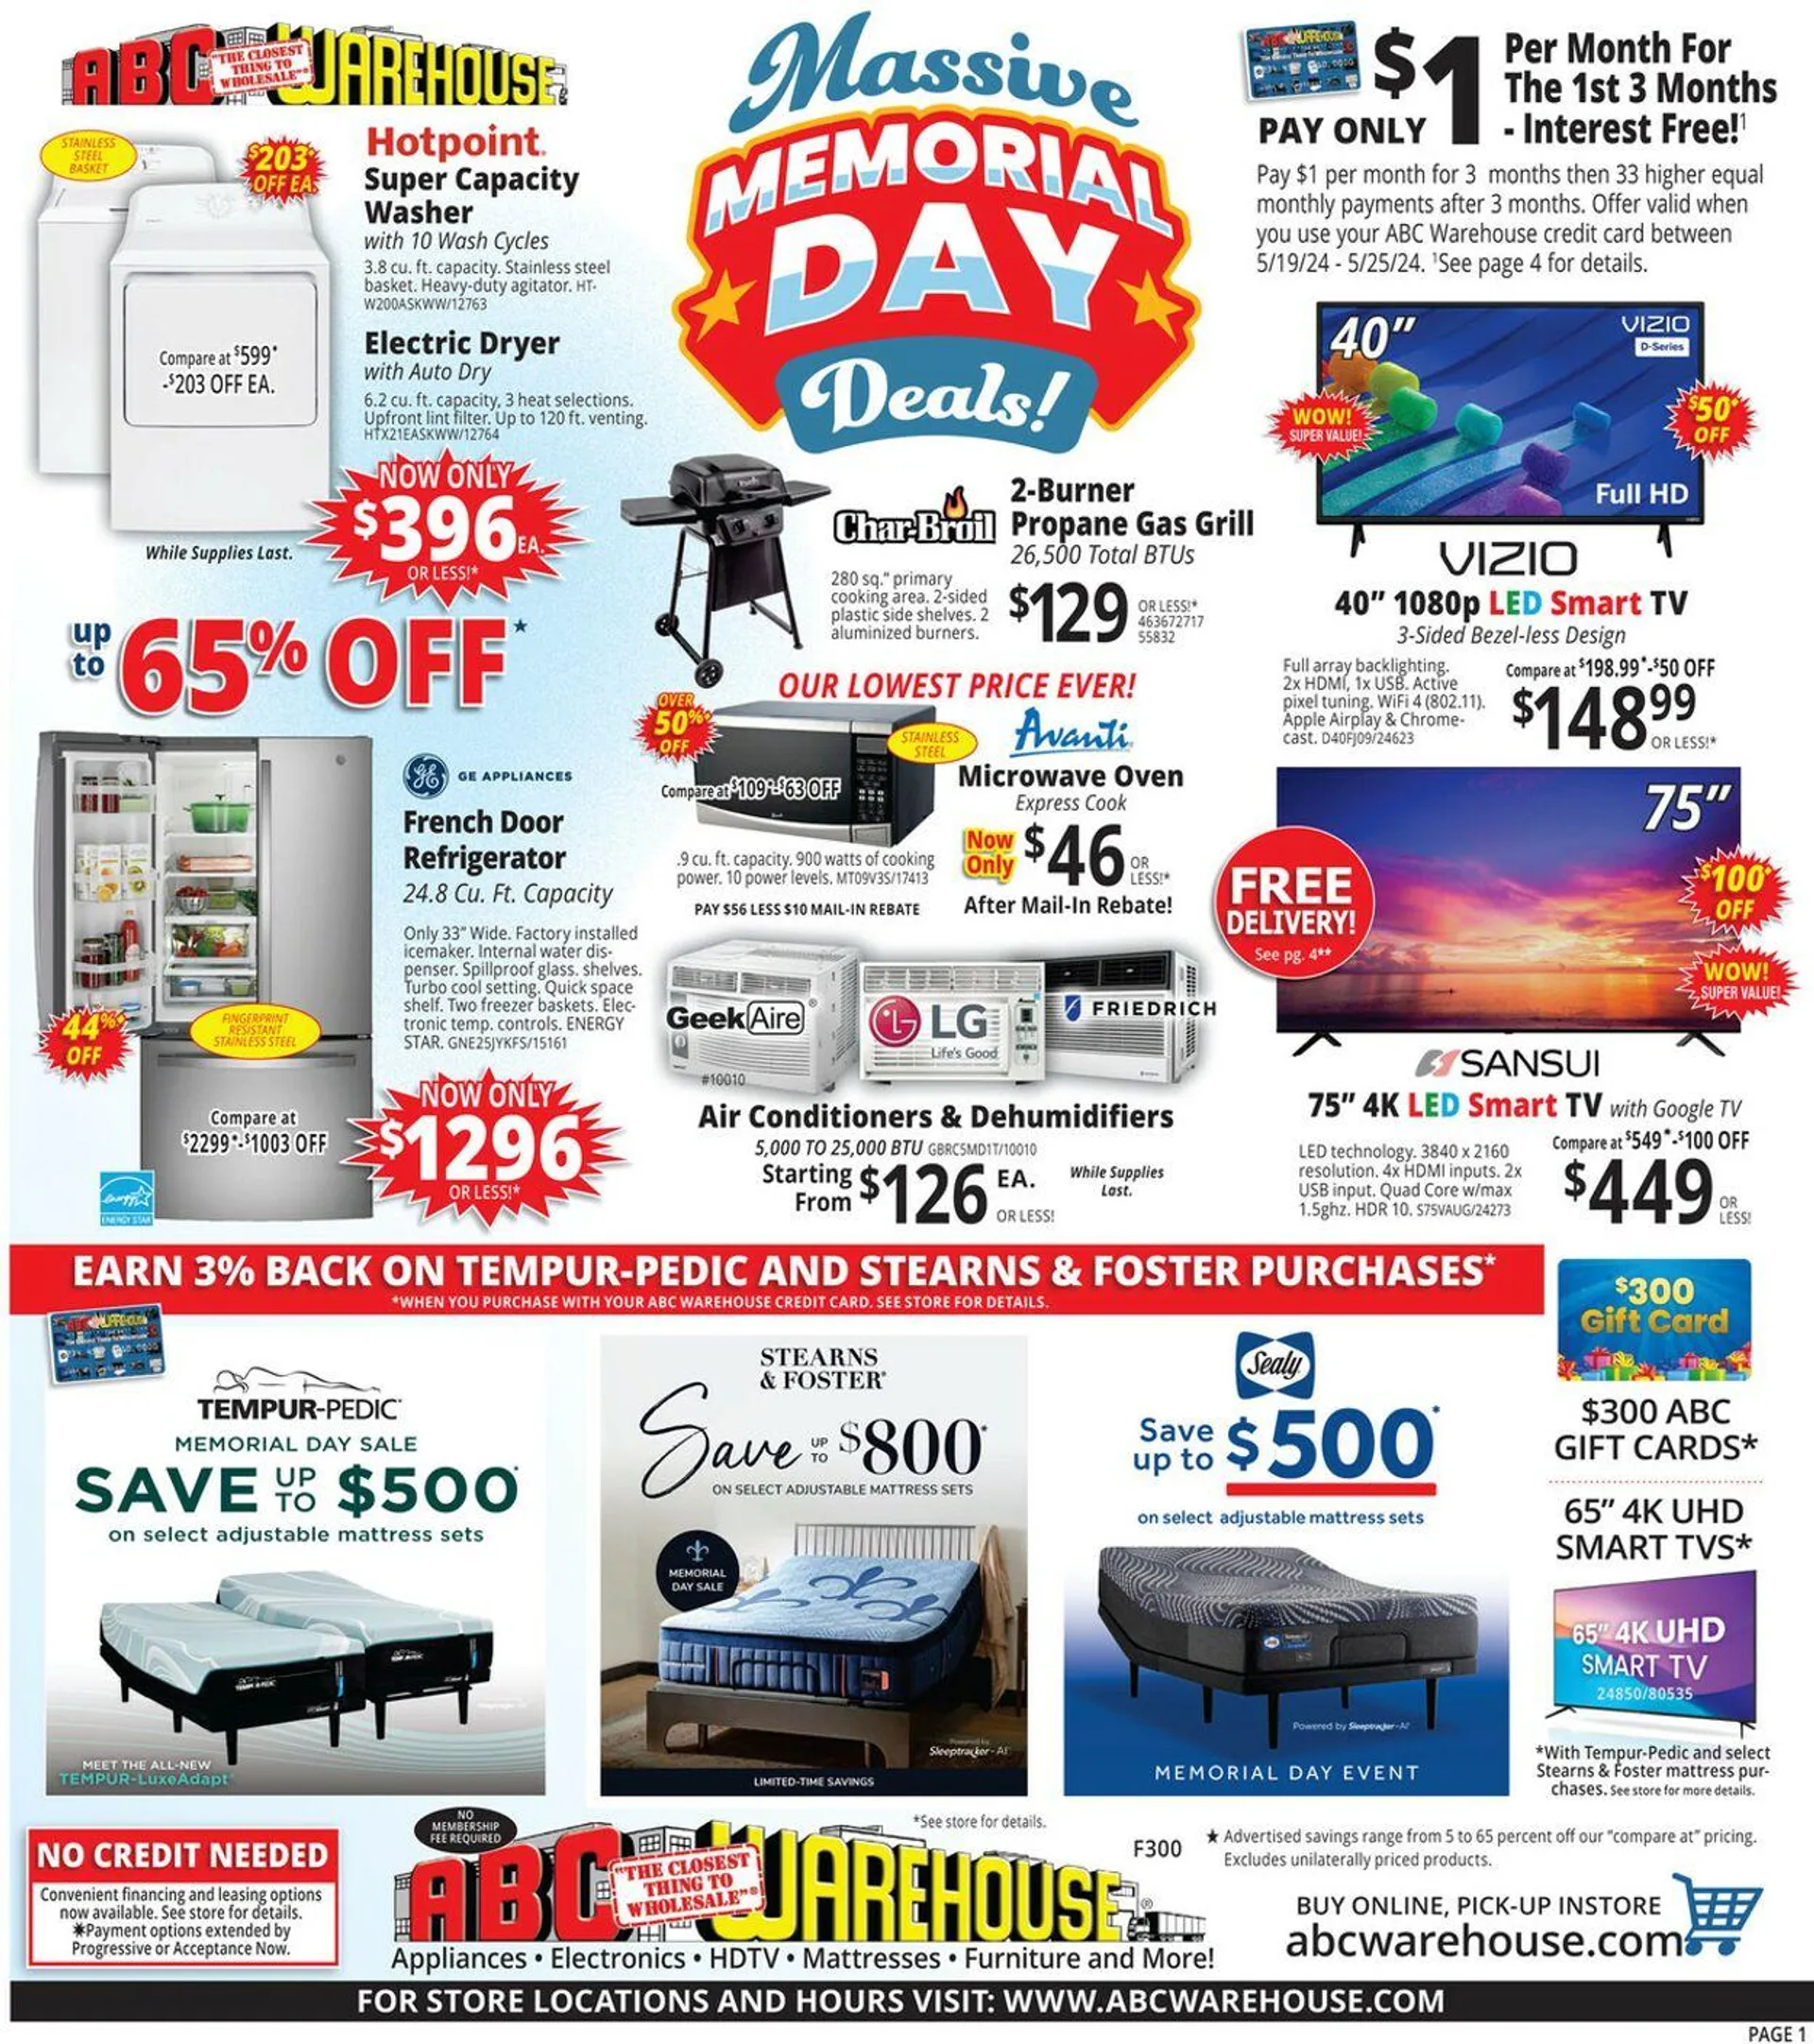 ABC Warehouse Current weekly ad - 1